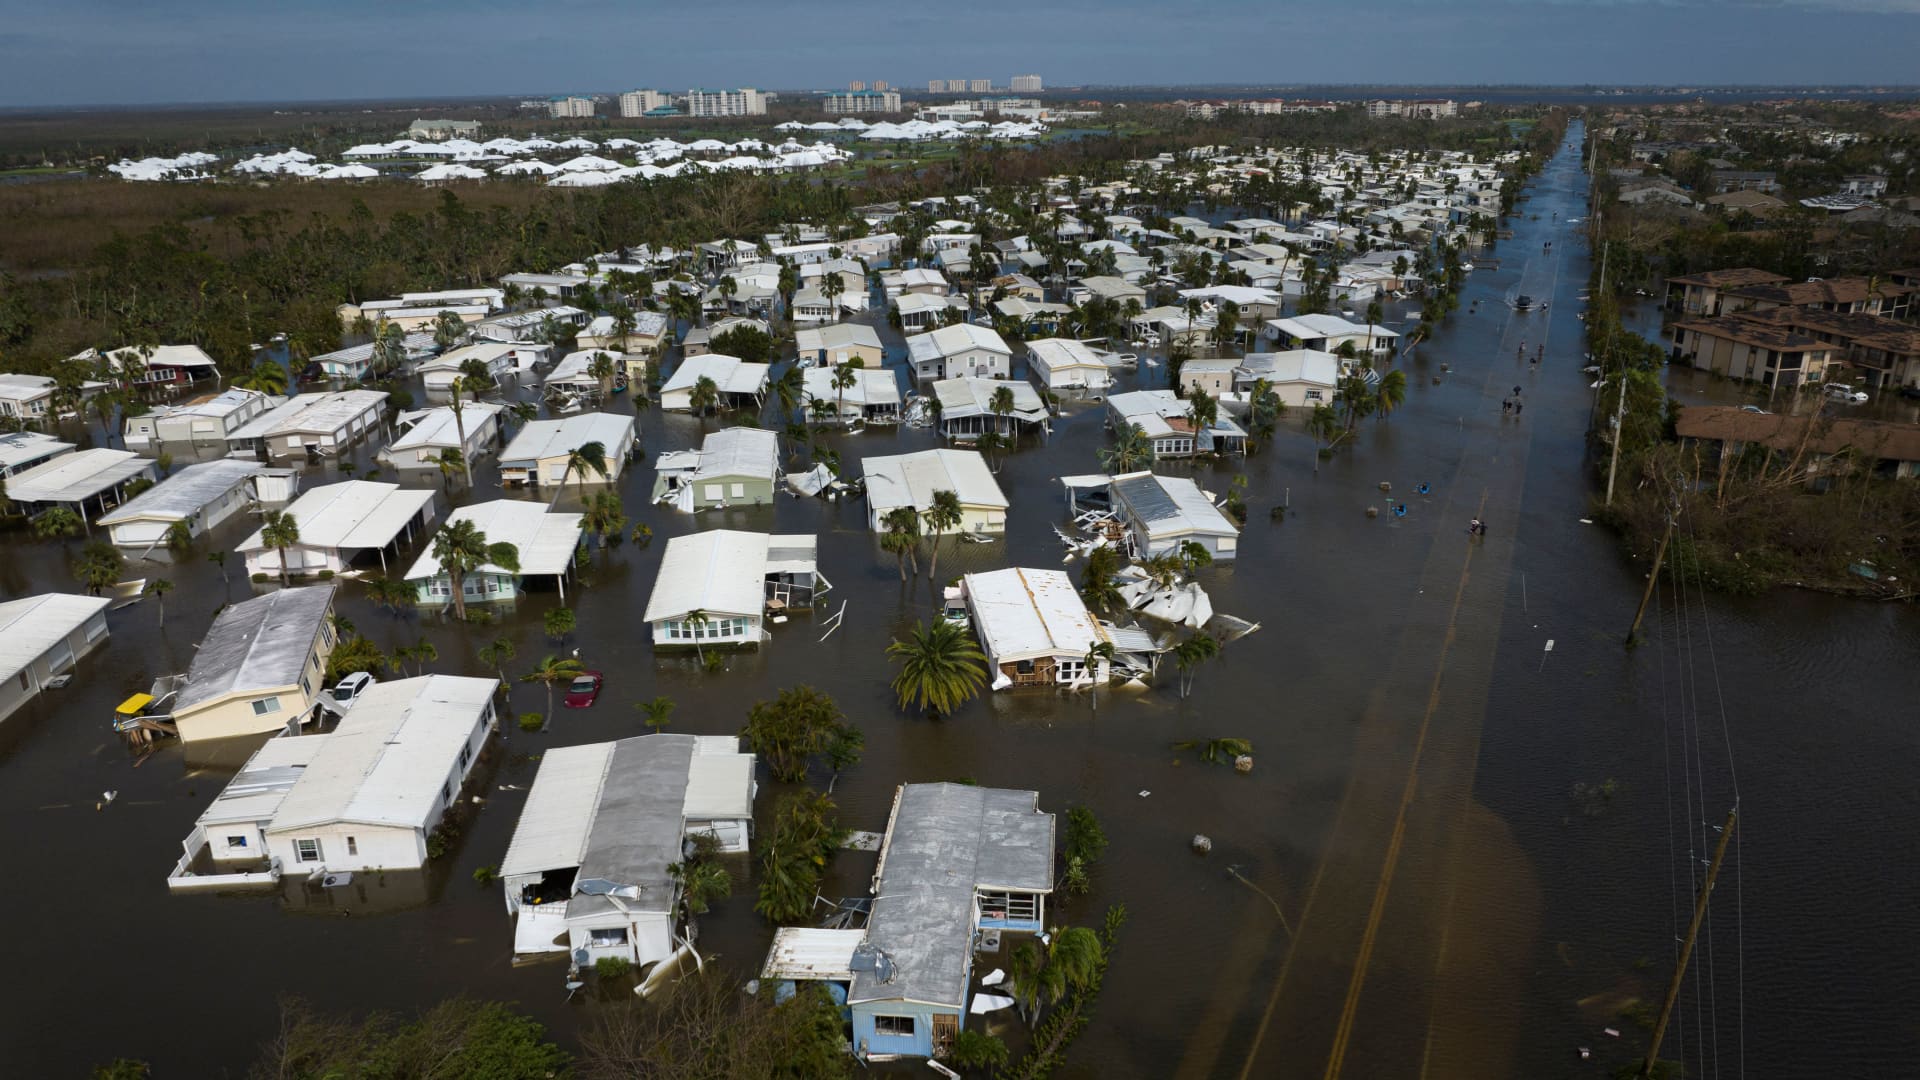 An aerial picture taken on September 29, 2022 shows a flooded neighborhood in the aftermath of Hurricane Ian in Fort Myers, Florida.